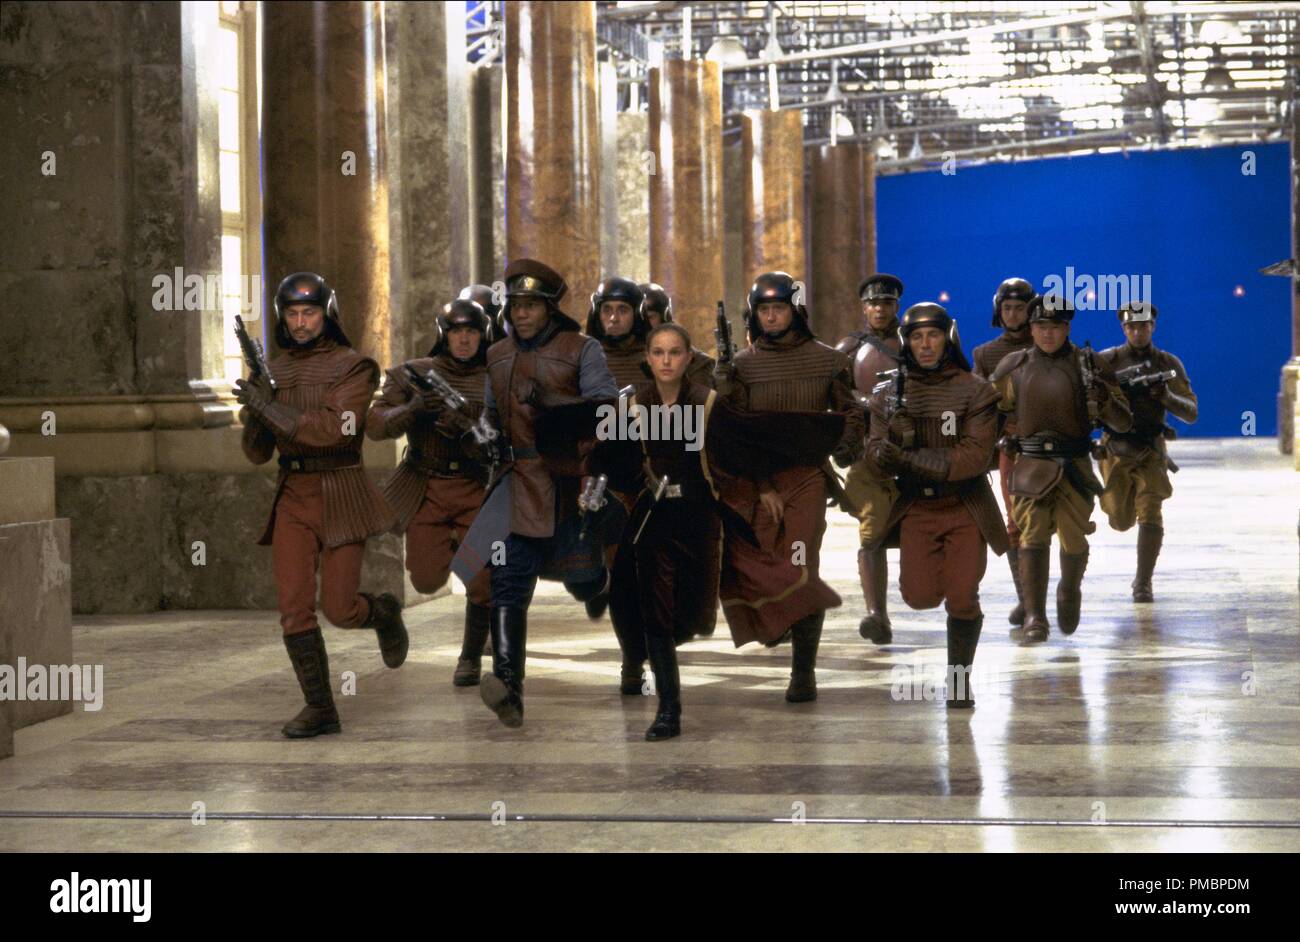 Queen Amidala (Natalie Portman) leads her security forces in 'Star Wars Episode I: The Phantom Menace' (1999)  File Reference # 32603 444THA Stock Photo